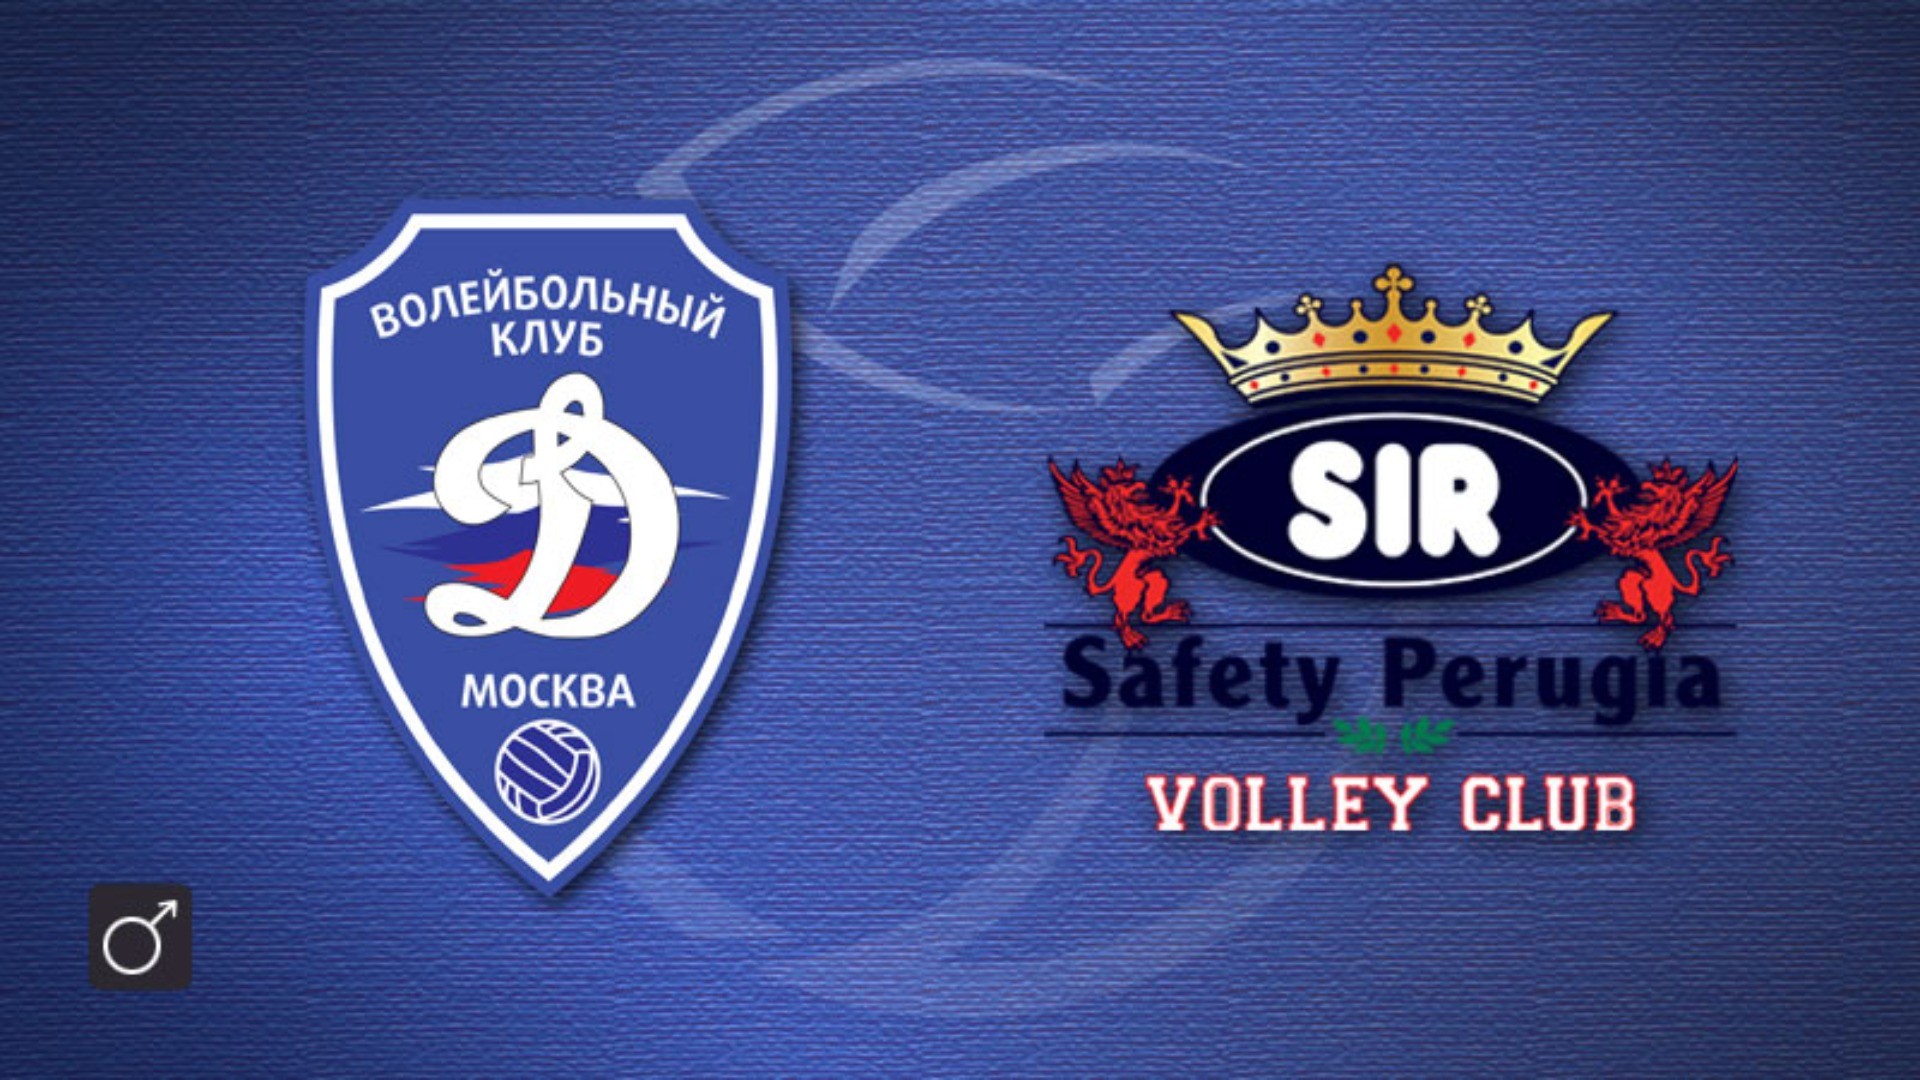 Sir Safety Umbria Volley - HD Wallpaper 